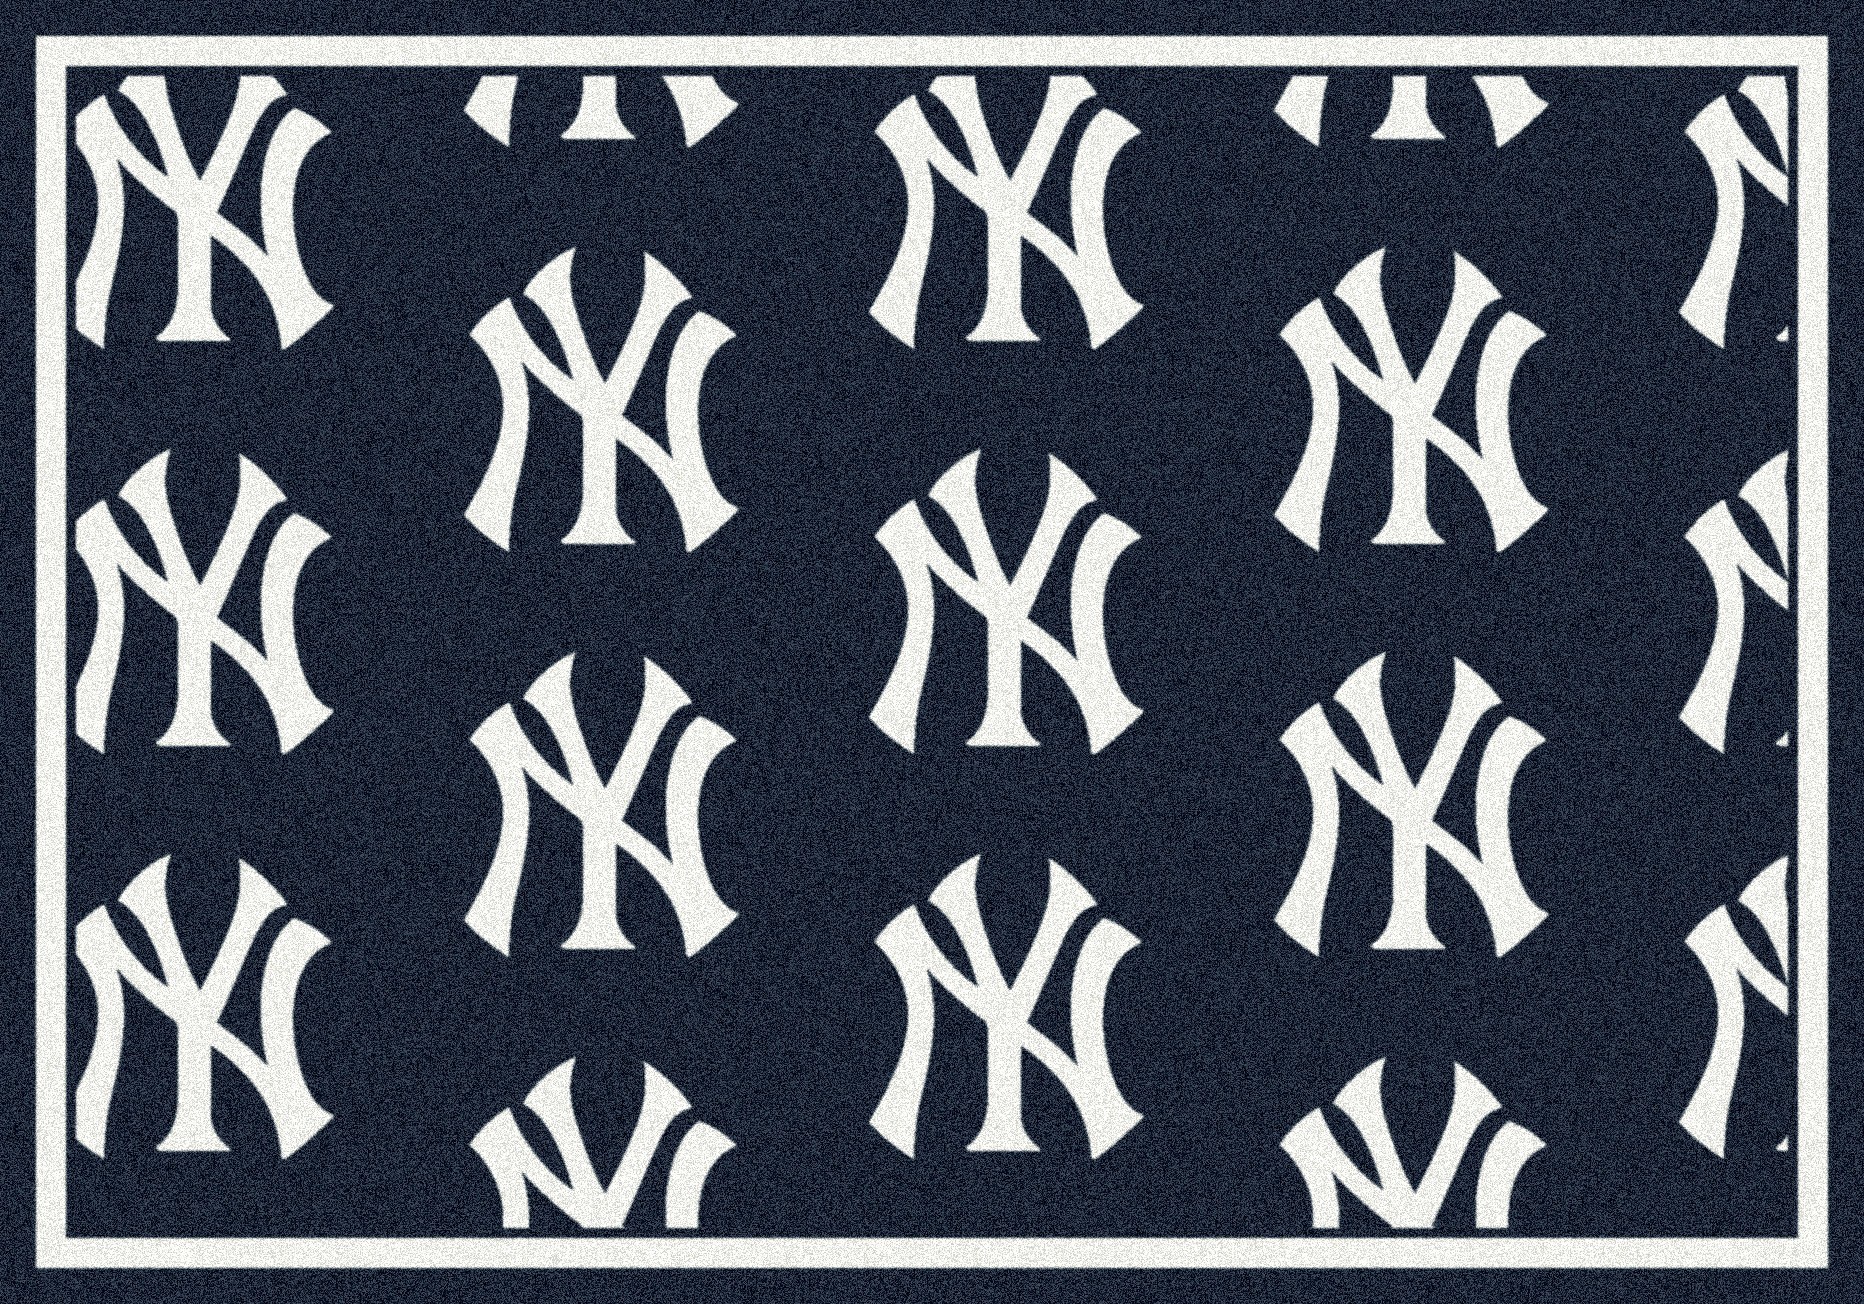 NY Yankees Logo Wallpaper 65 pictures